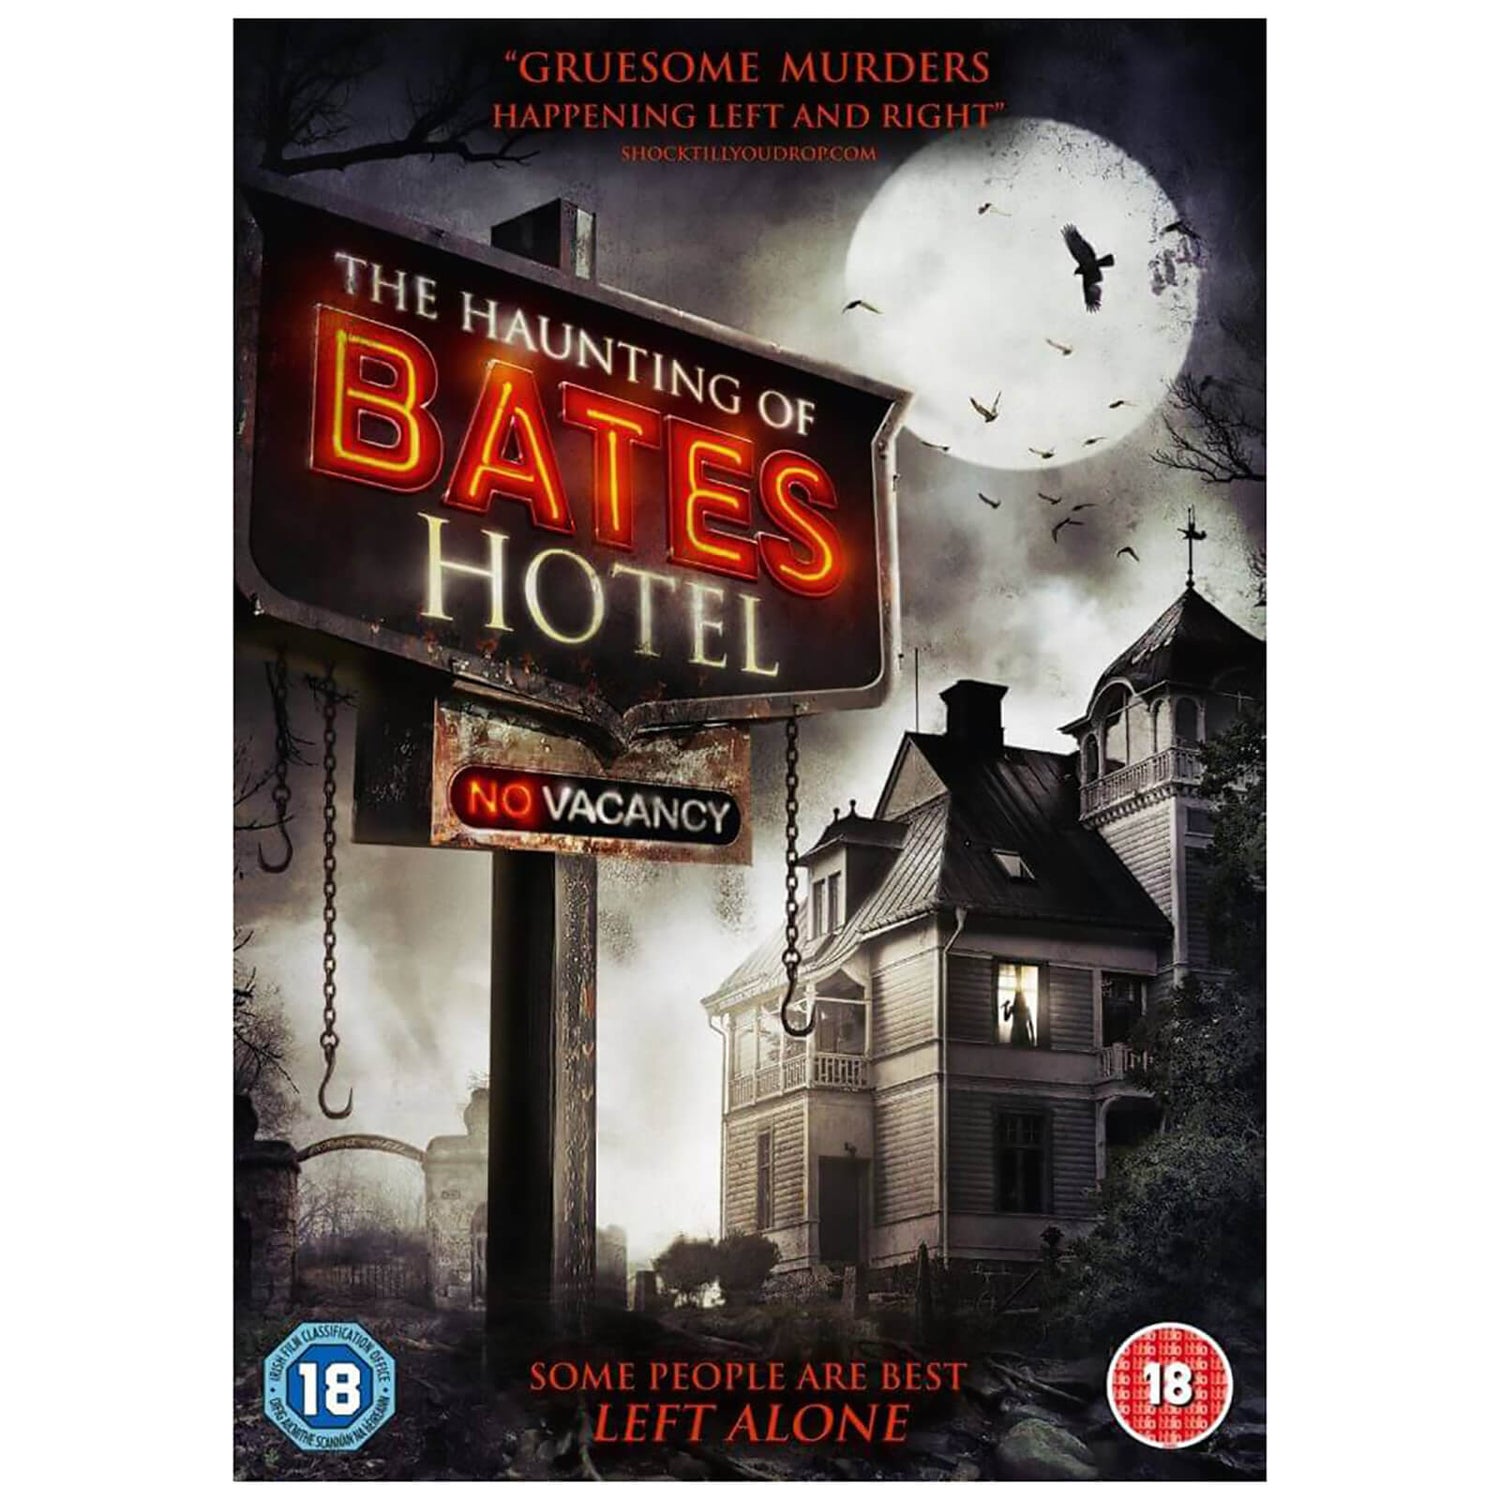 The Haunting of Bates Hotel